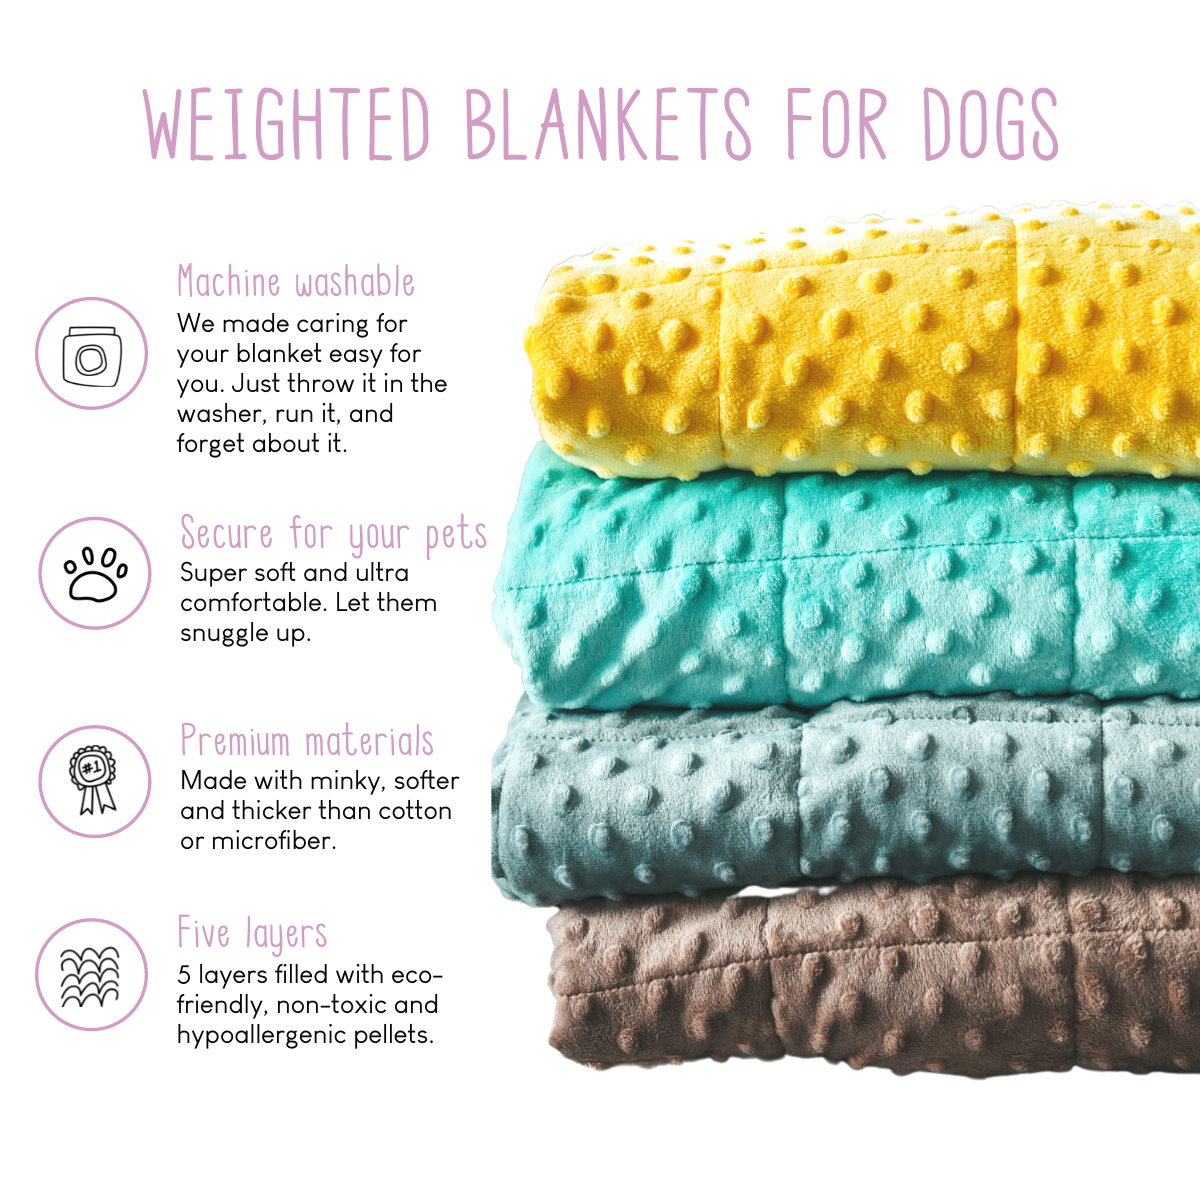 The Pawfect Blanket